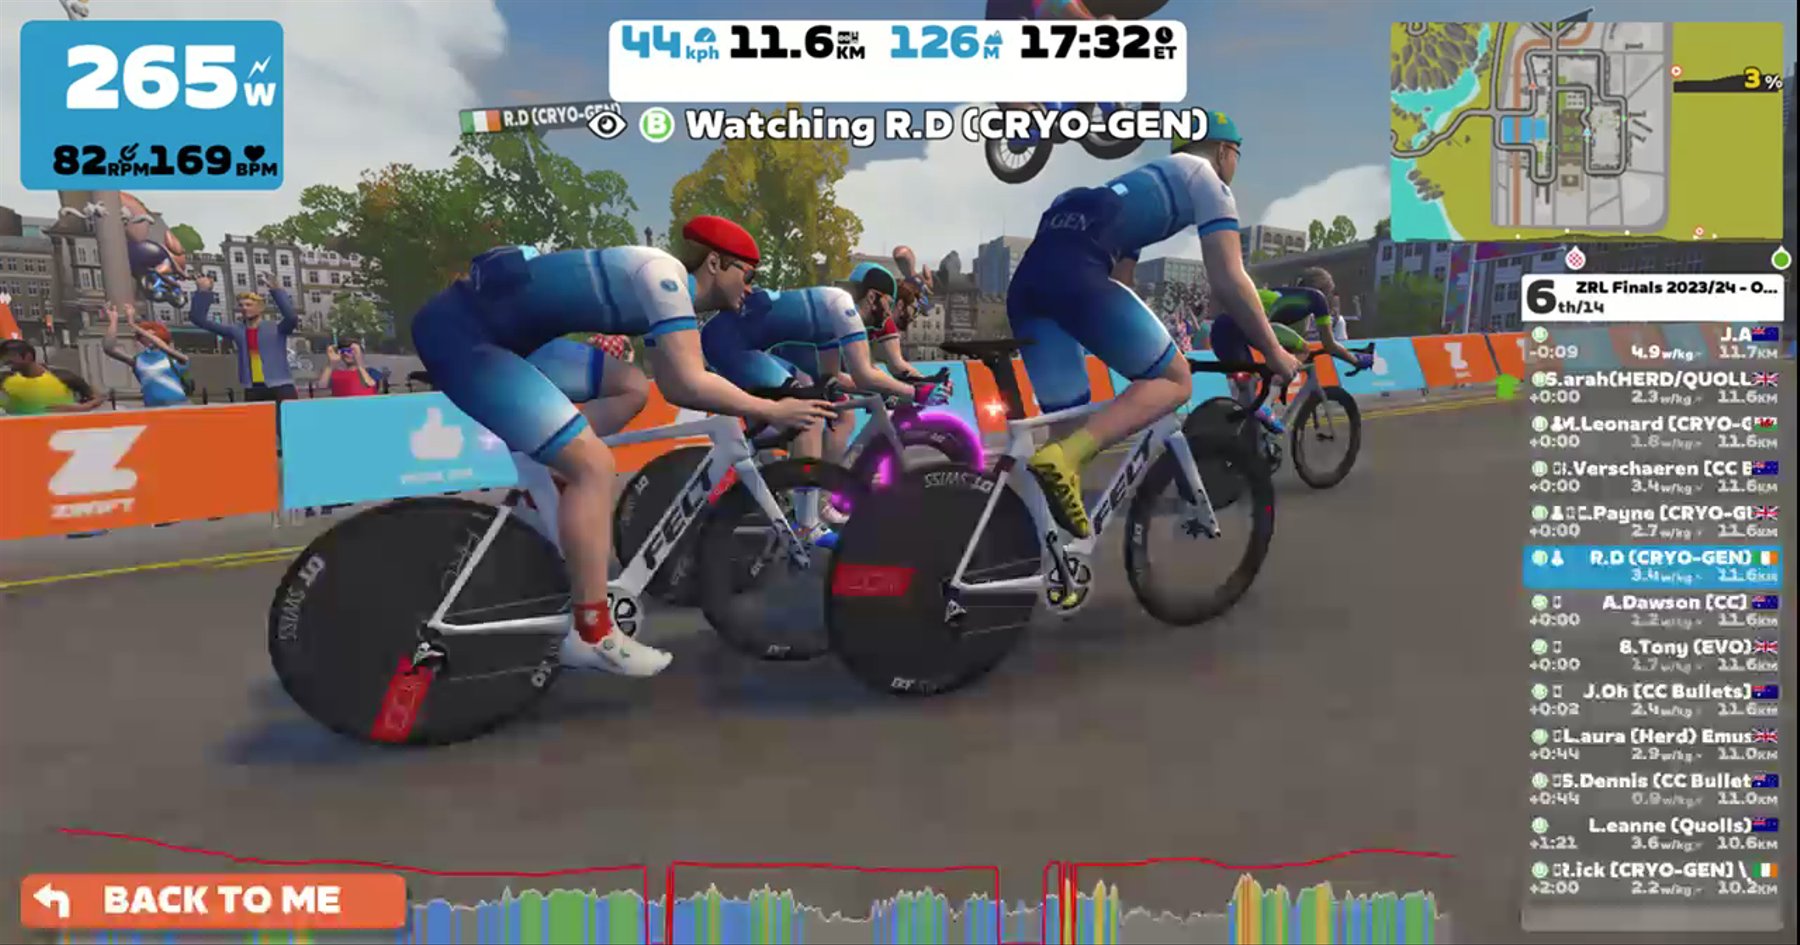 Zwift - Race: ZRL Finals 2023/24 - Open OCEANIA Division 2 - Plate Final (Part2) (B) on Glasgow Reverse in Scotland- Feel free to join our Zwift Club, Facebook, or Strava group any time for for more info go to www.cryogen.team 